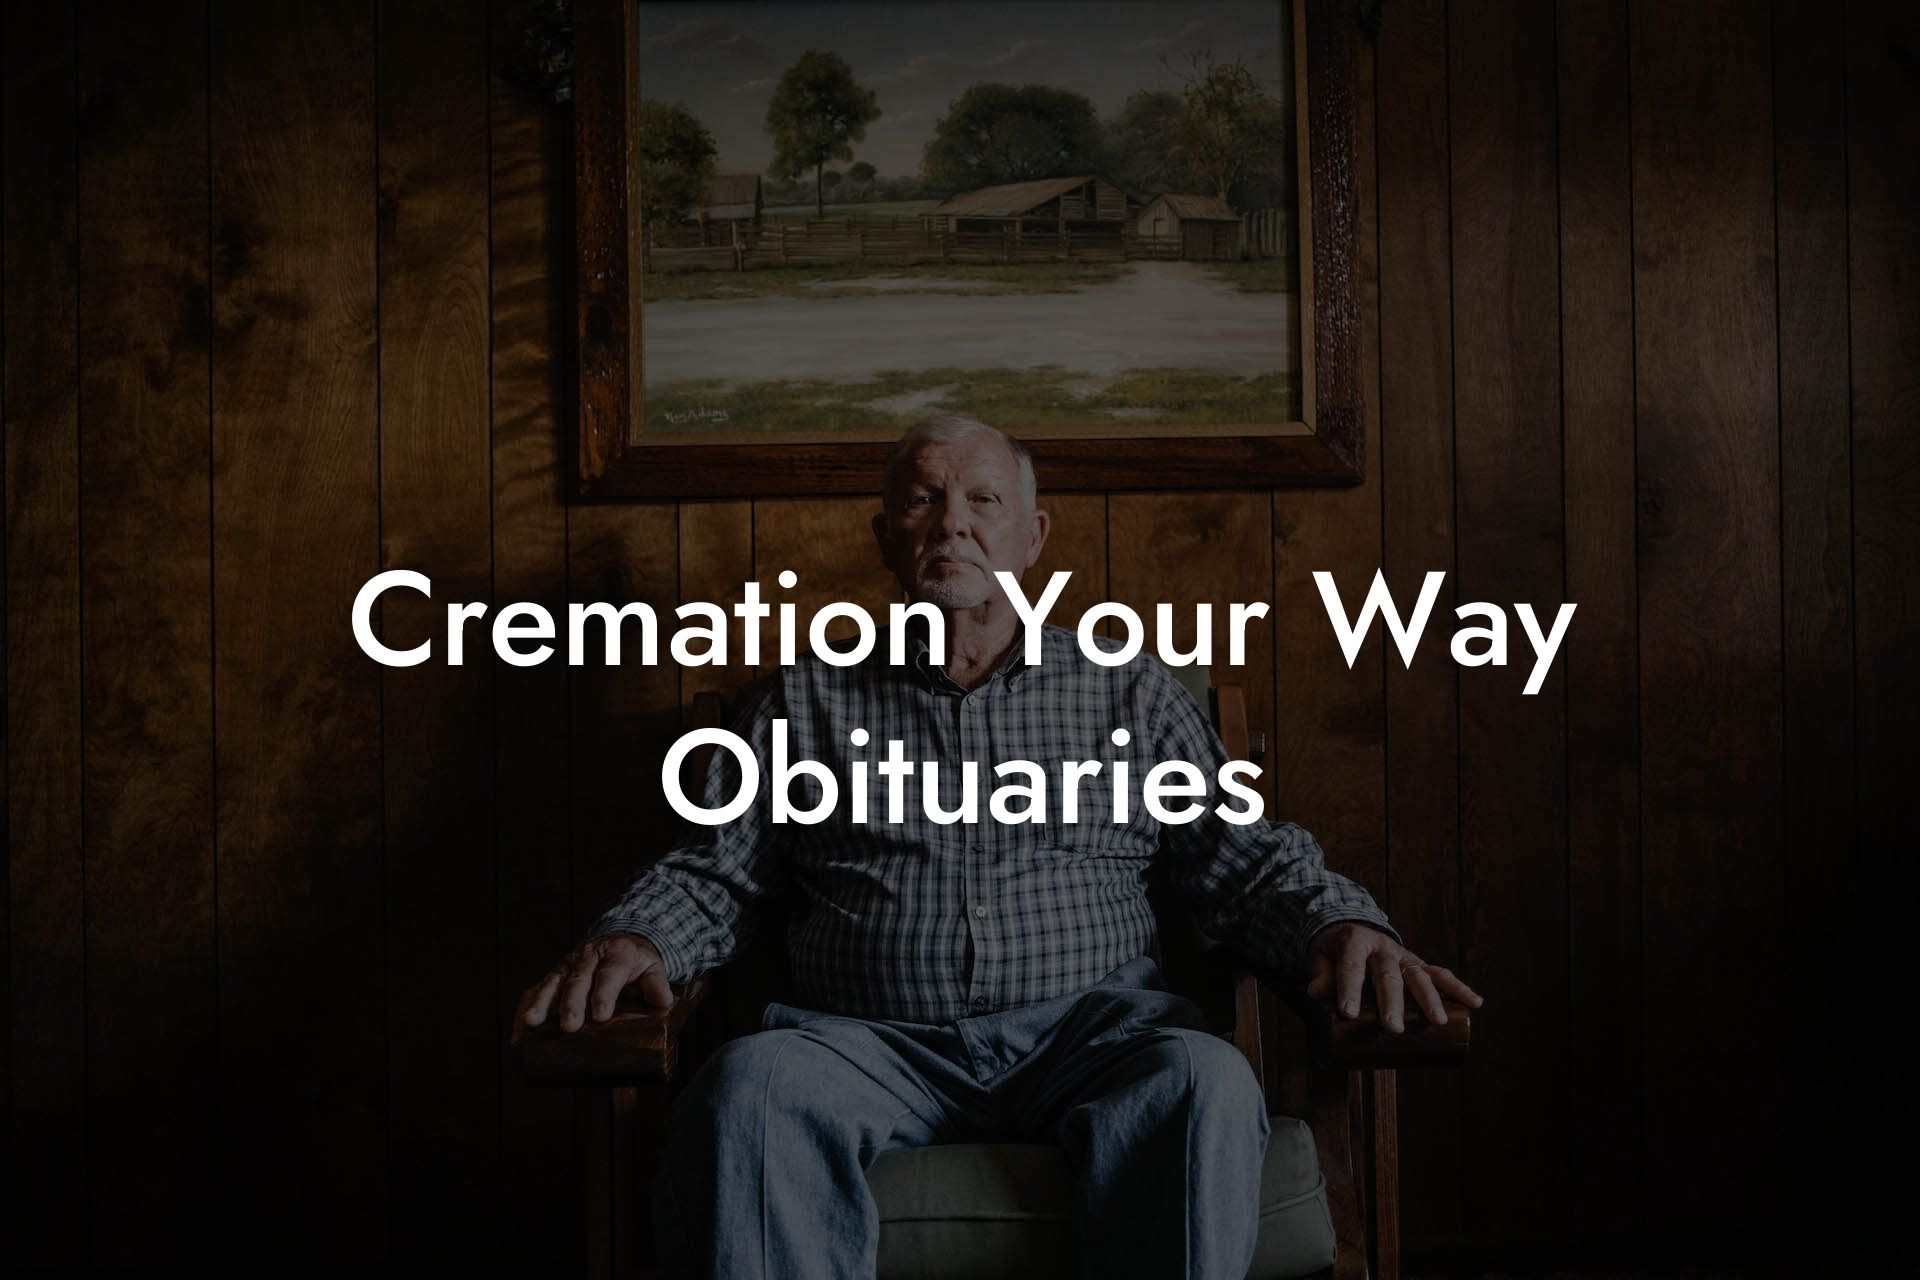 Cremation Your Way Obituaries